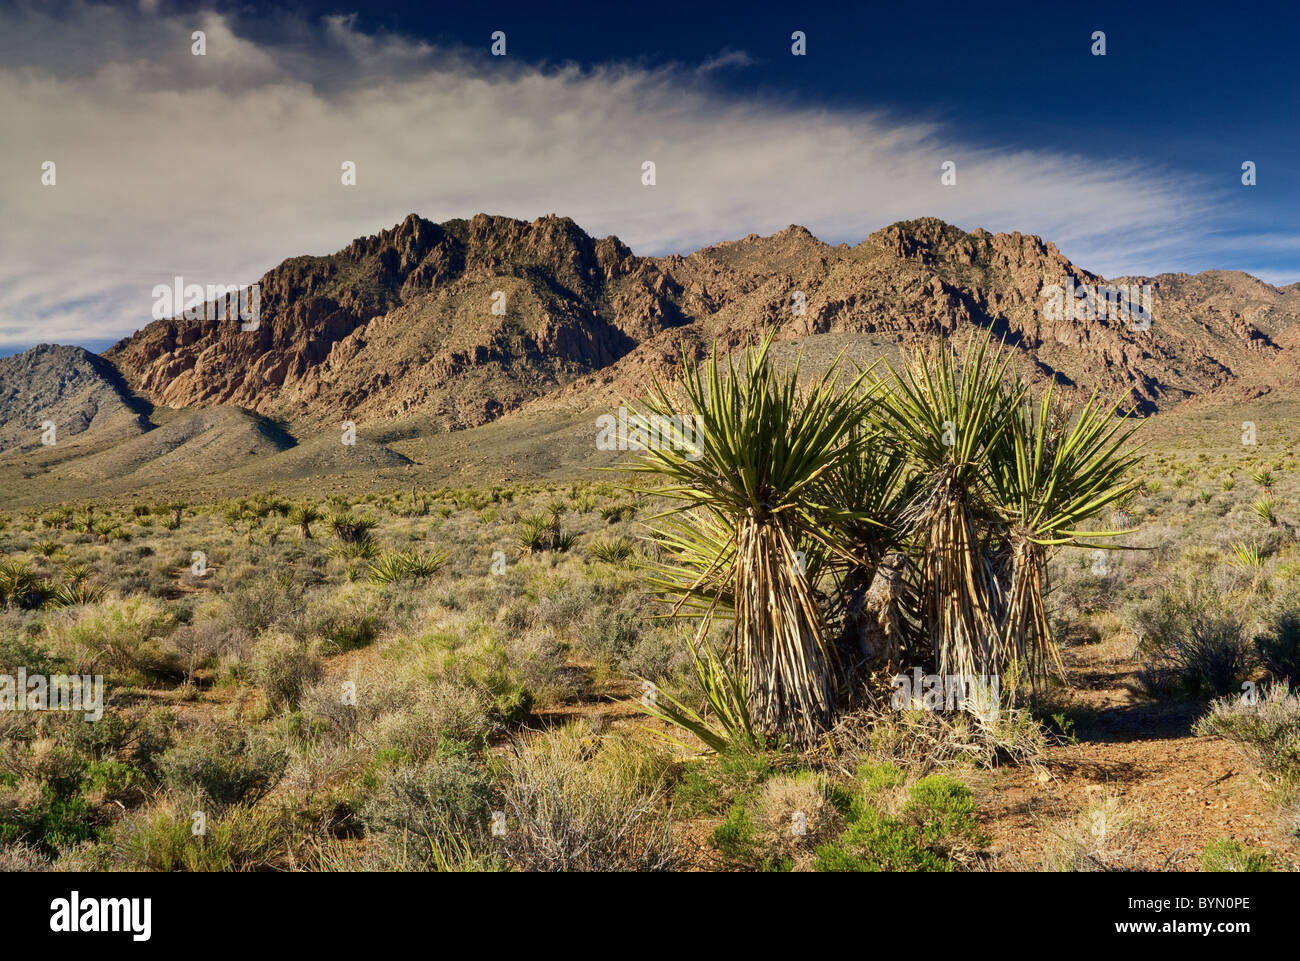 Mojave yucca also known as Spanish Dagger with Kingston Range mountains in Mojave Desert, California, USA Stock Photo